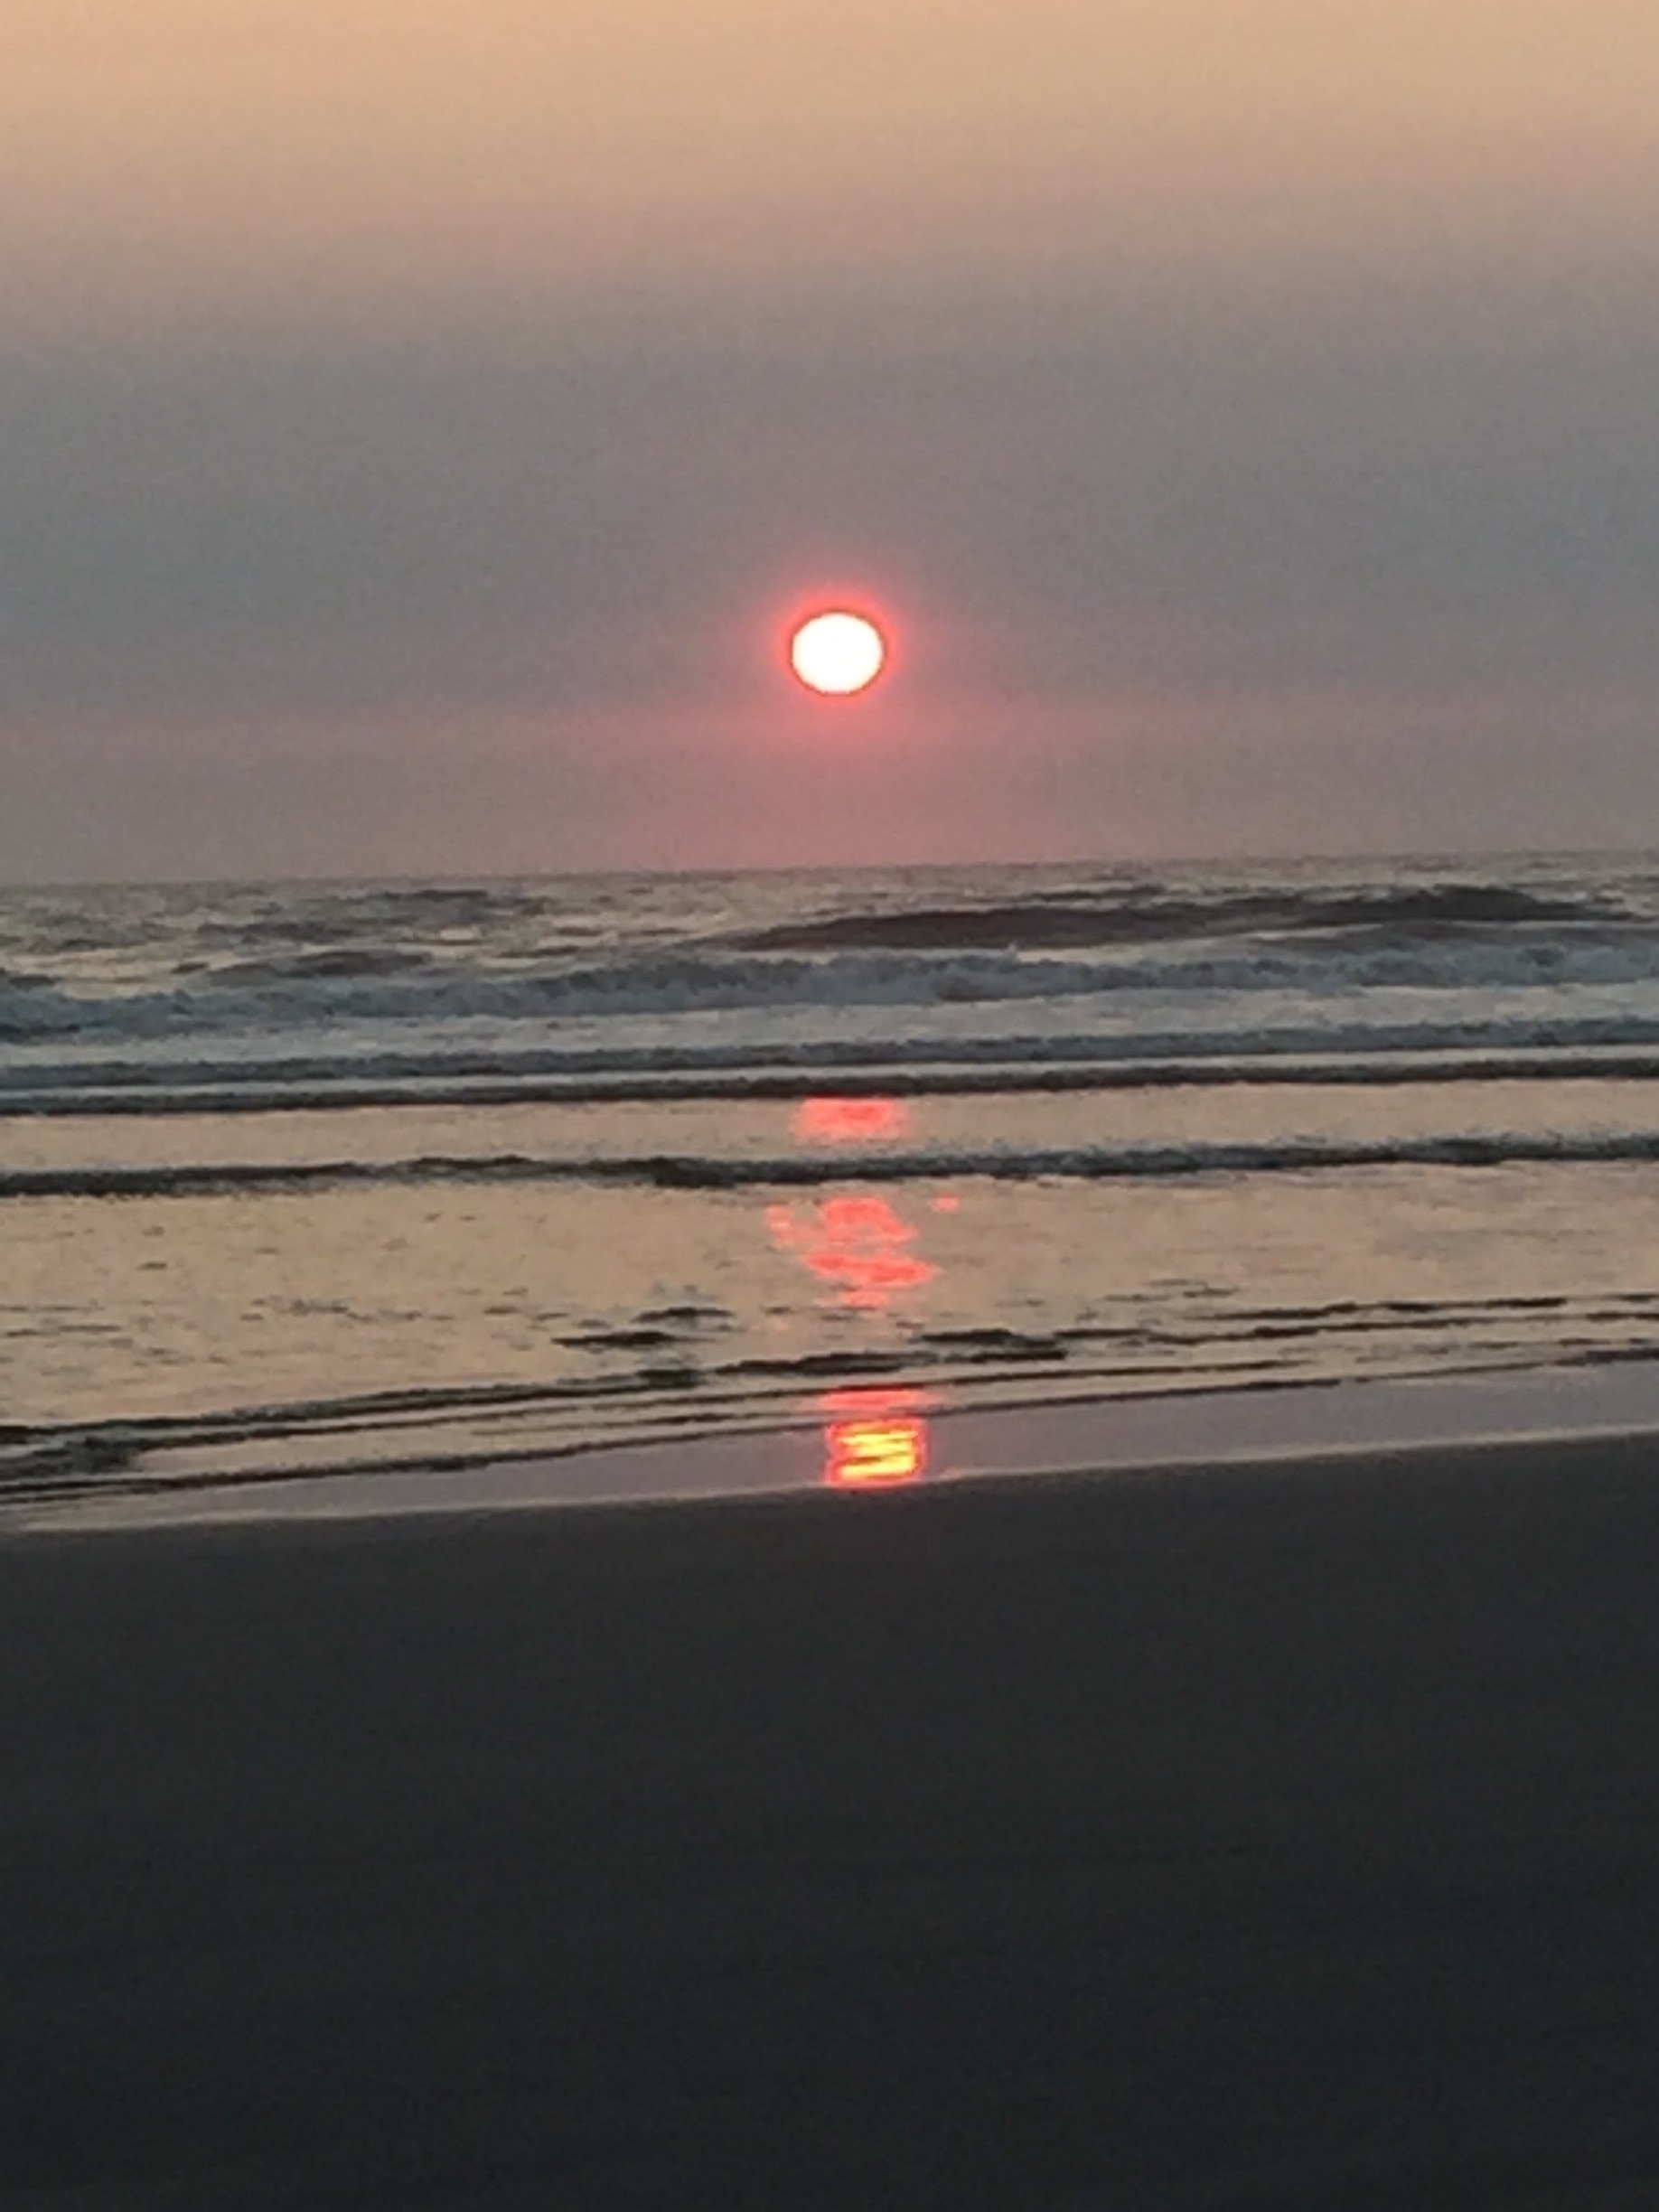 Loved seeing this sunset through the smoke haze coming from British Columbia and Washington. So much beach when the tide is out. 